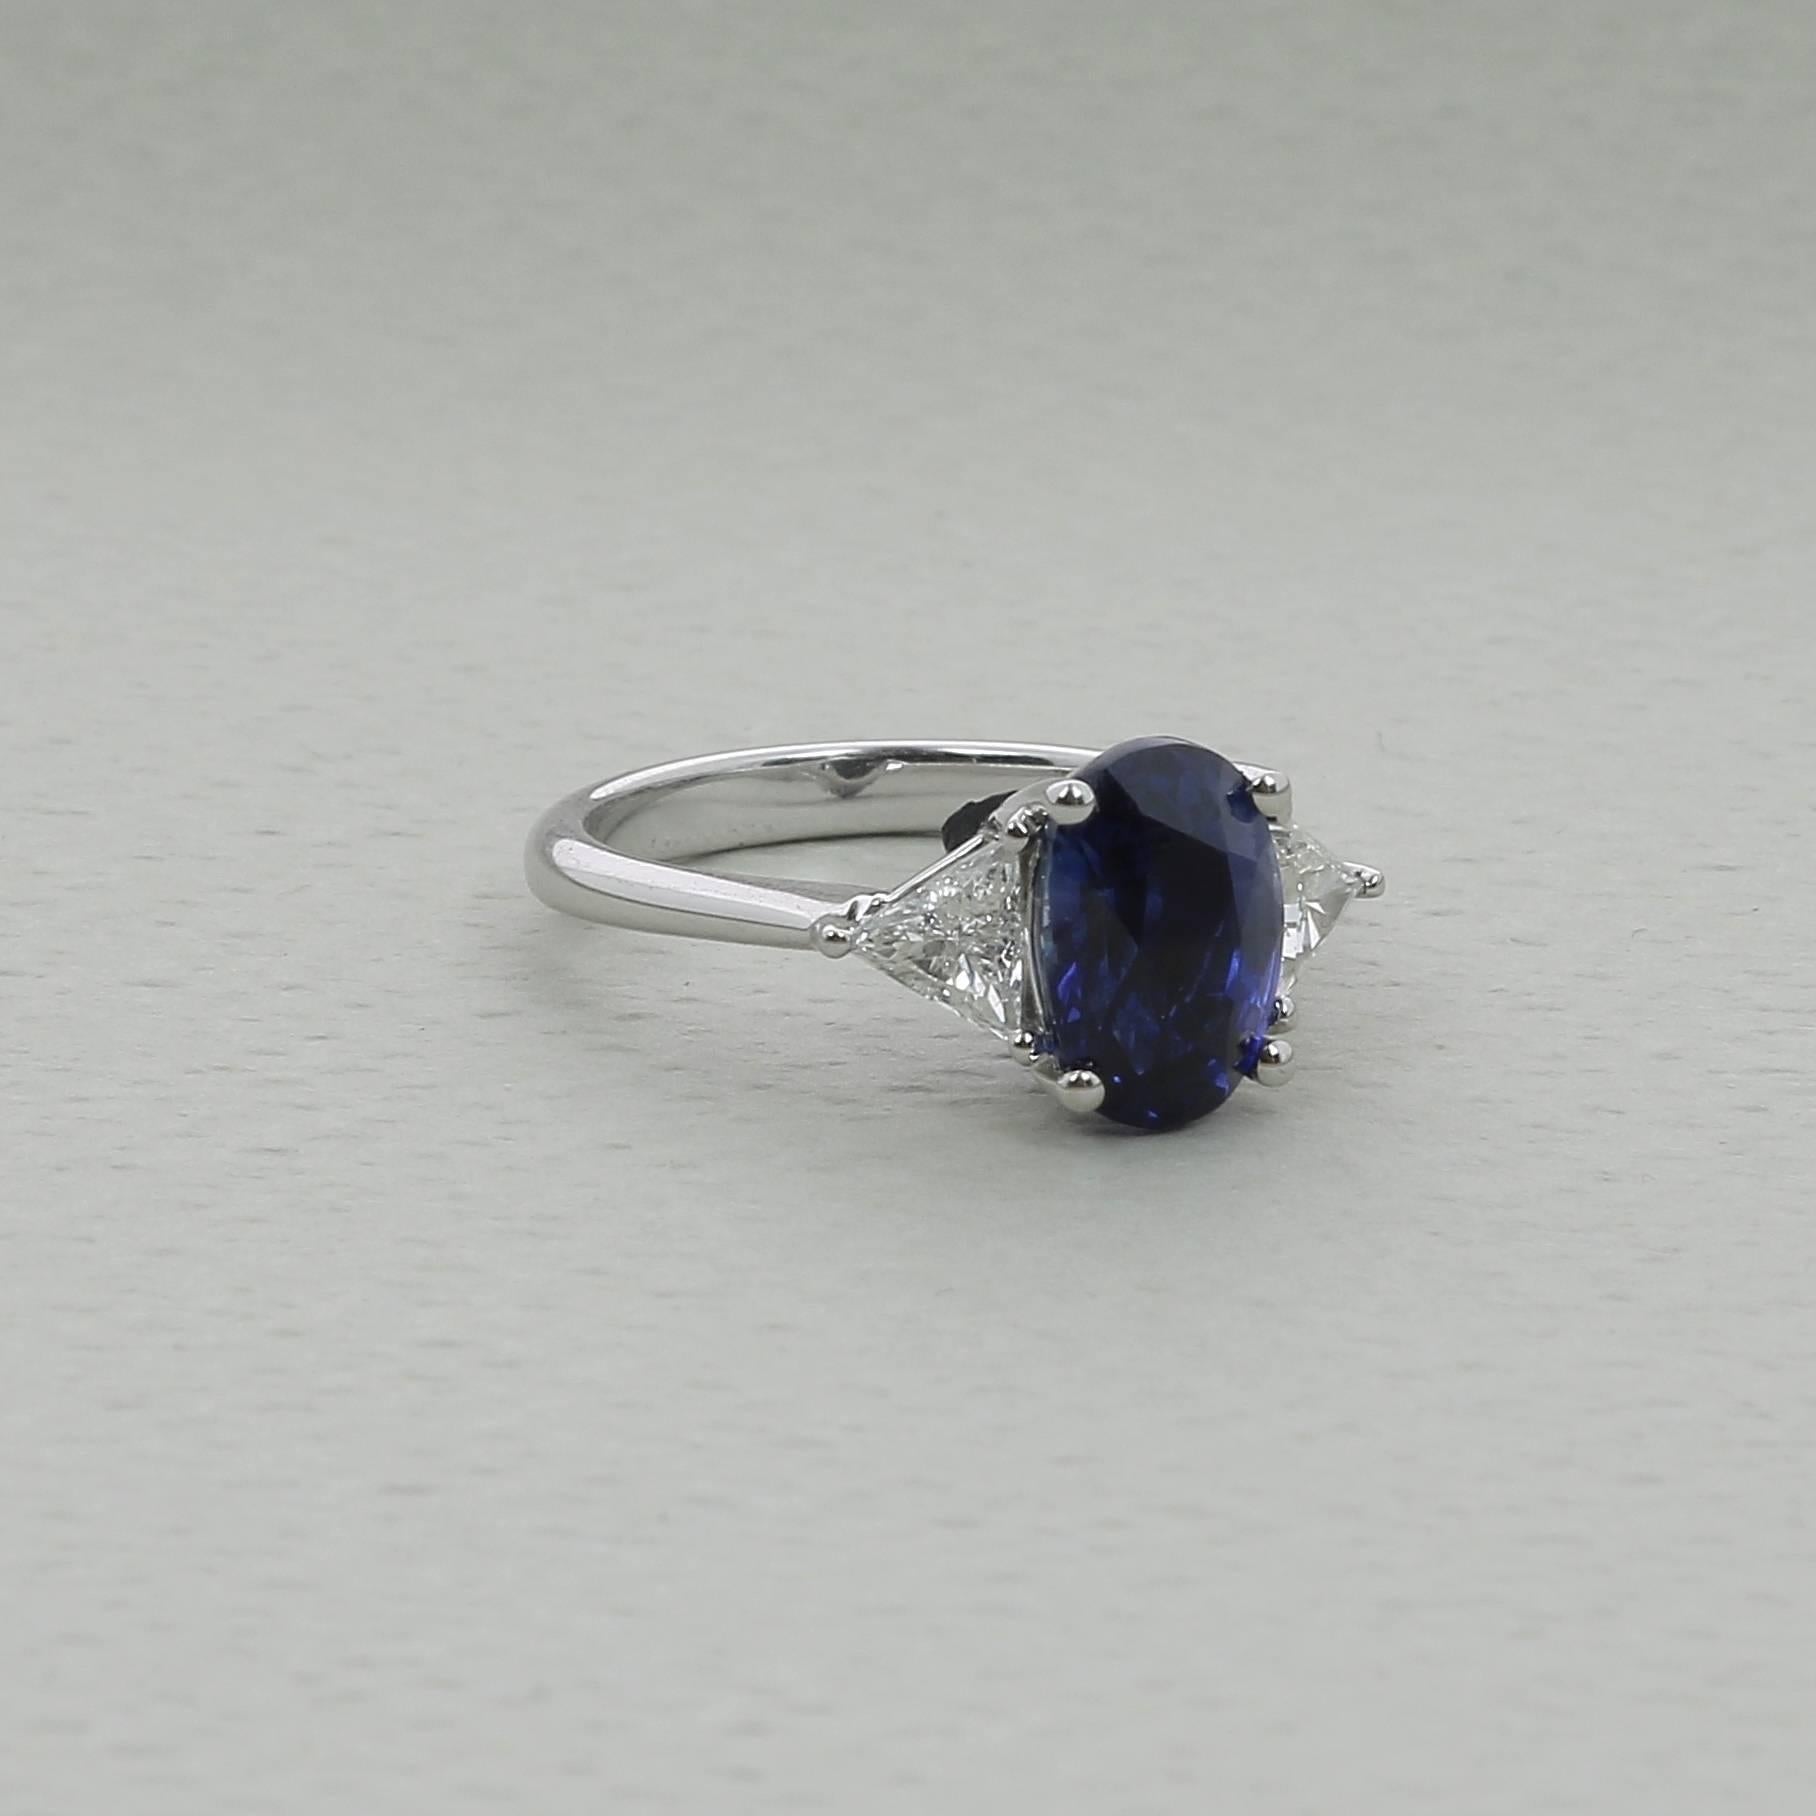 A Blue Sapphire Ring weighing 4.03 carats. 
The stone’s shape is oval, having for colors a striking Blue. 
The ring is set on each side by a single trillion-cut diamond (also called “trilliant-cut-diamond” or “trillian-cut-diamond”) weighing 0.49